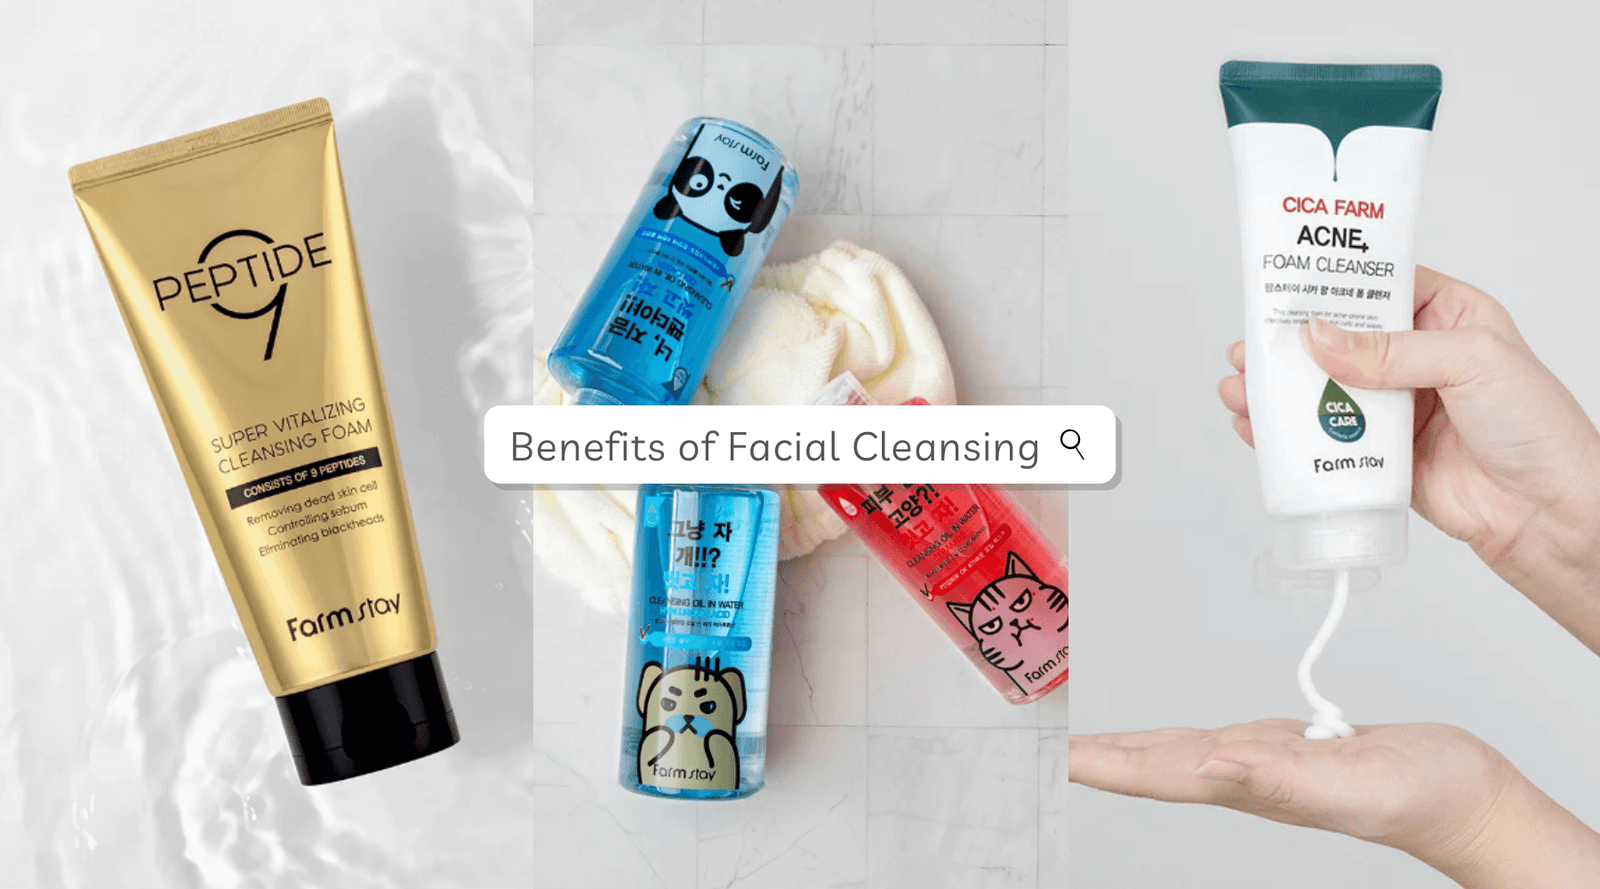 Benefits Of Facial Cleansing For Your Skin - UShops